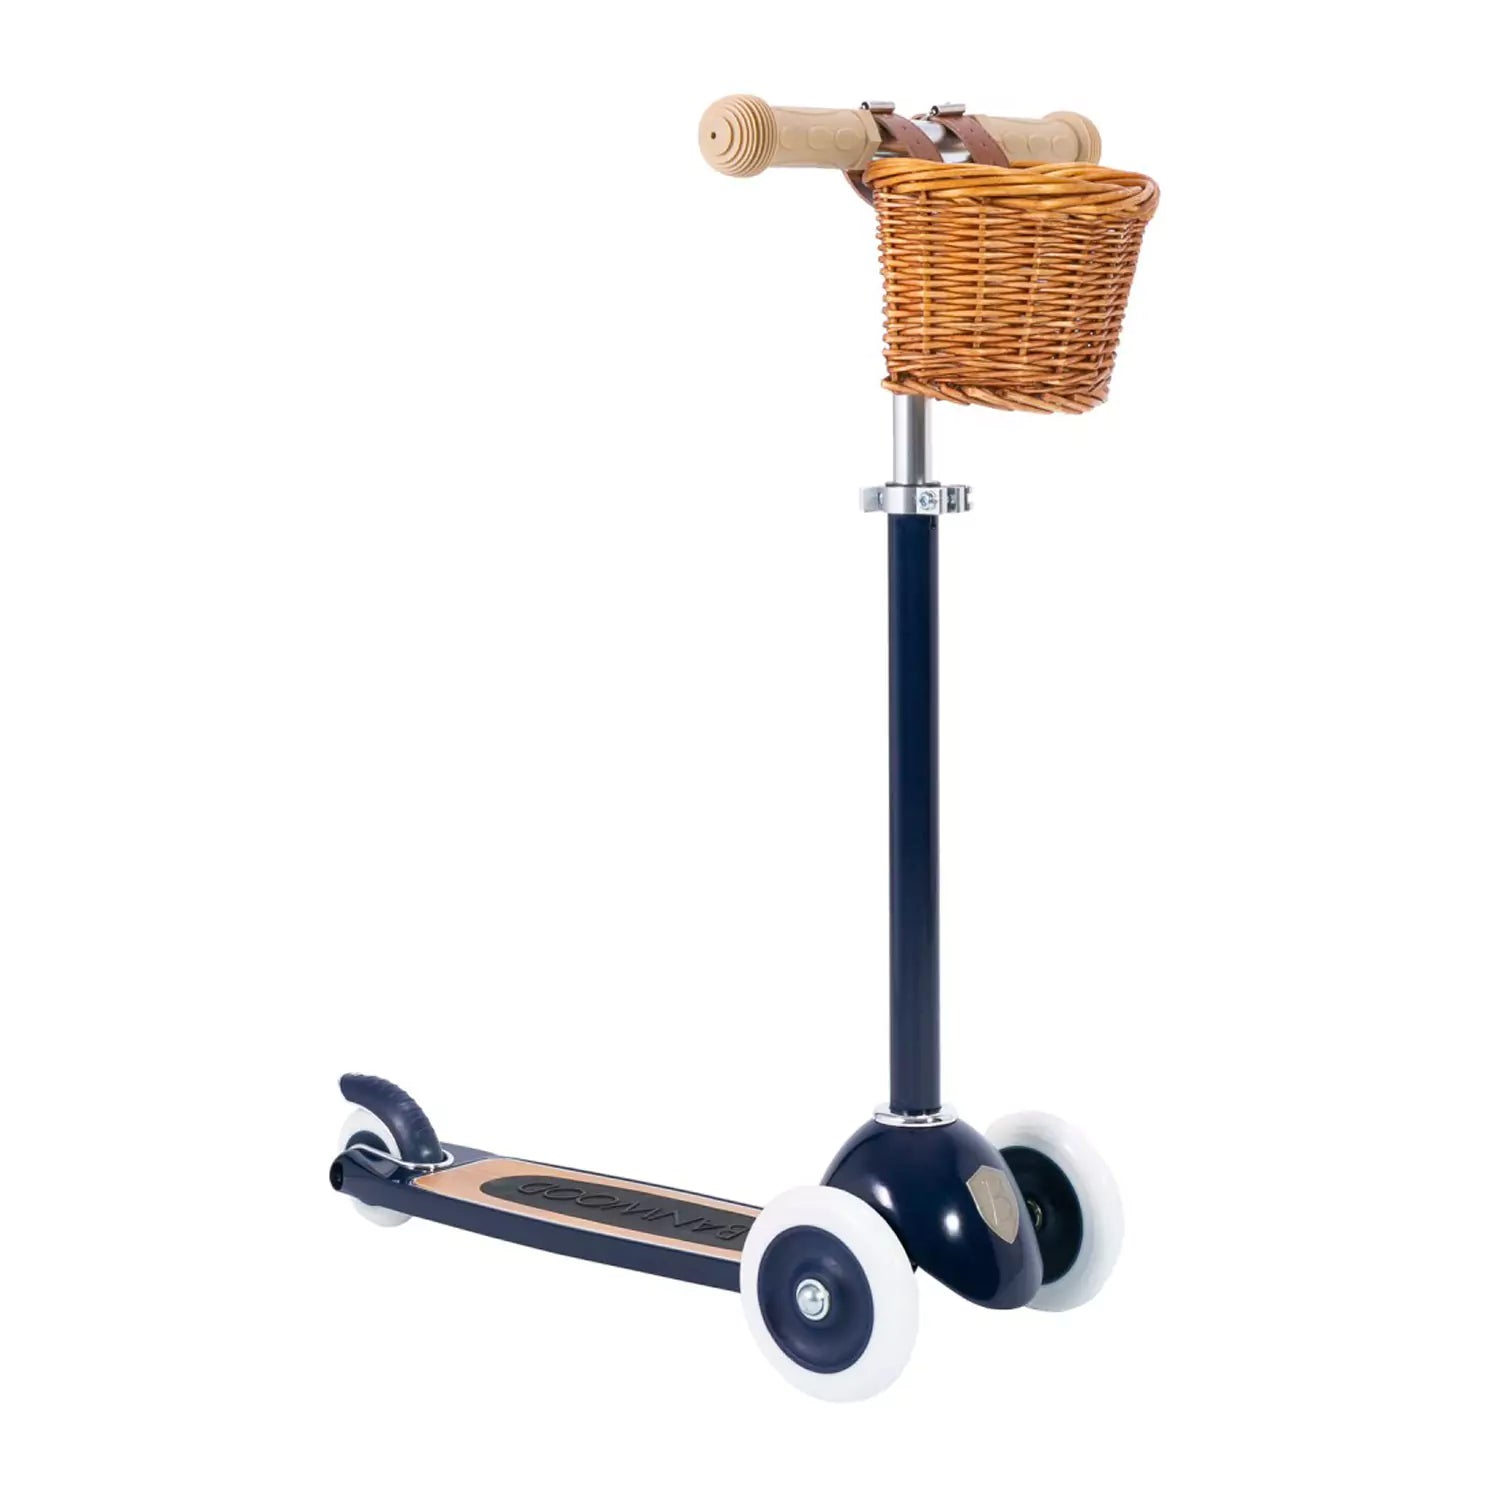 An image of Banwood Banwood Classic Scooter: Scooter with Wicker Basket for Kids